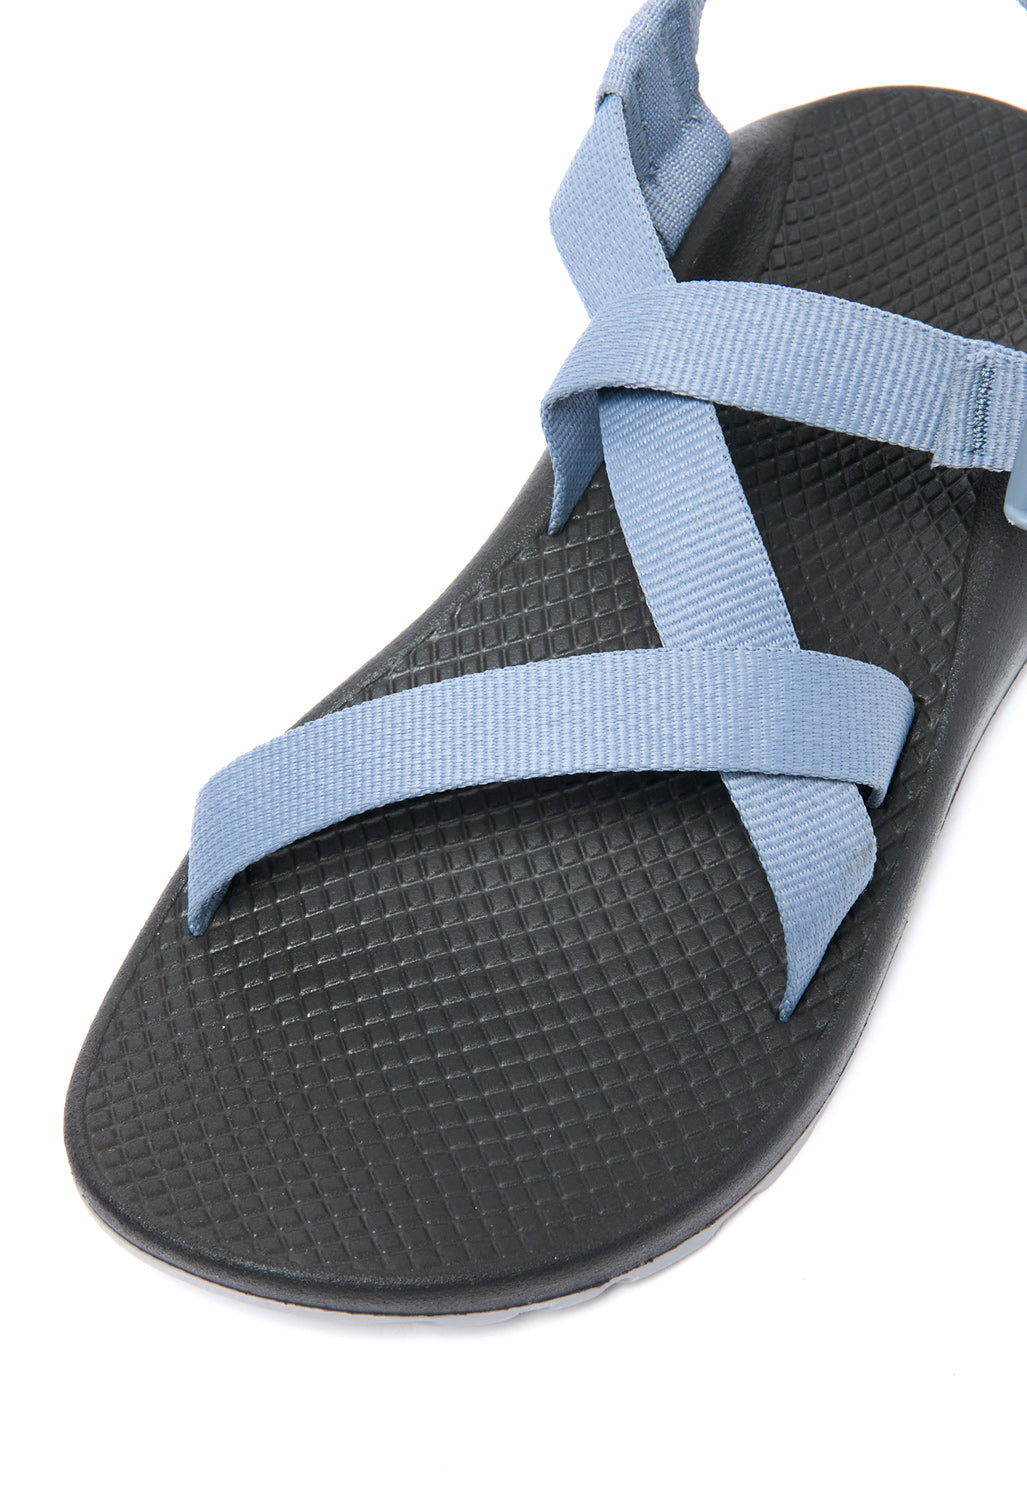 Chaco Women's Z1 Classic Sandals - Solid Tradewinds